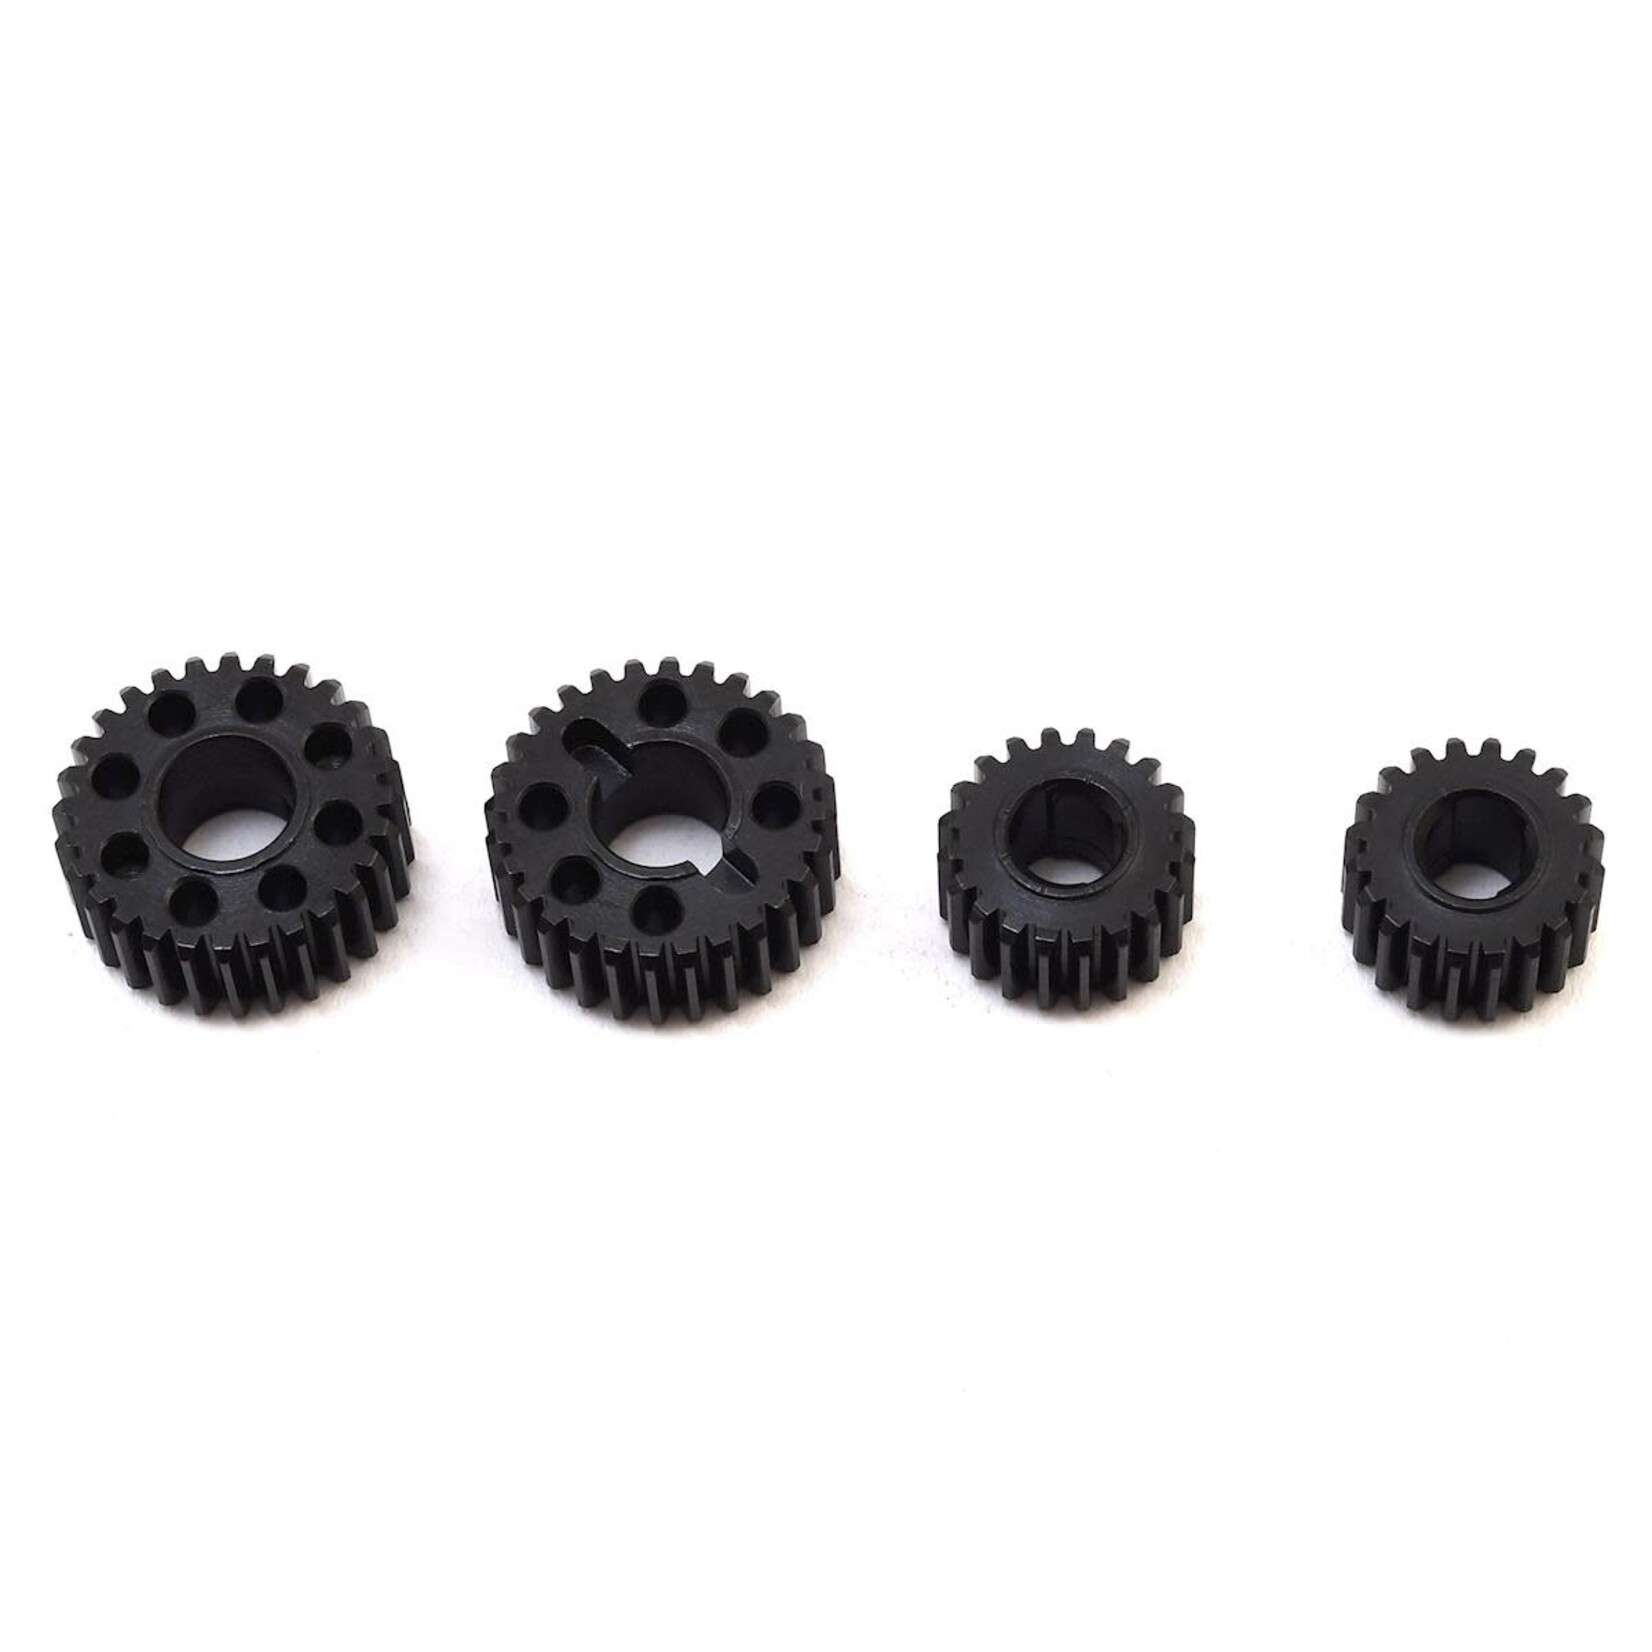 Vanquish Products Vanquish Products Currie Portal Overdrive Gear Set #VPS08353